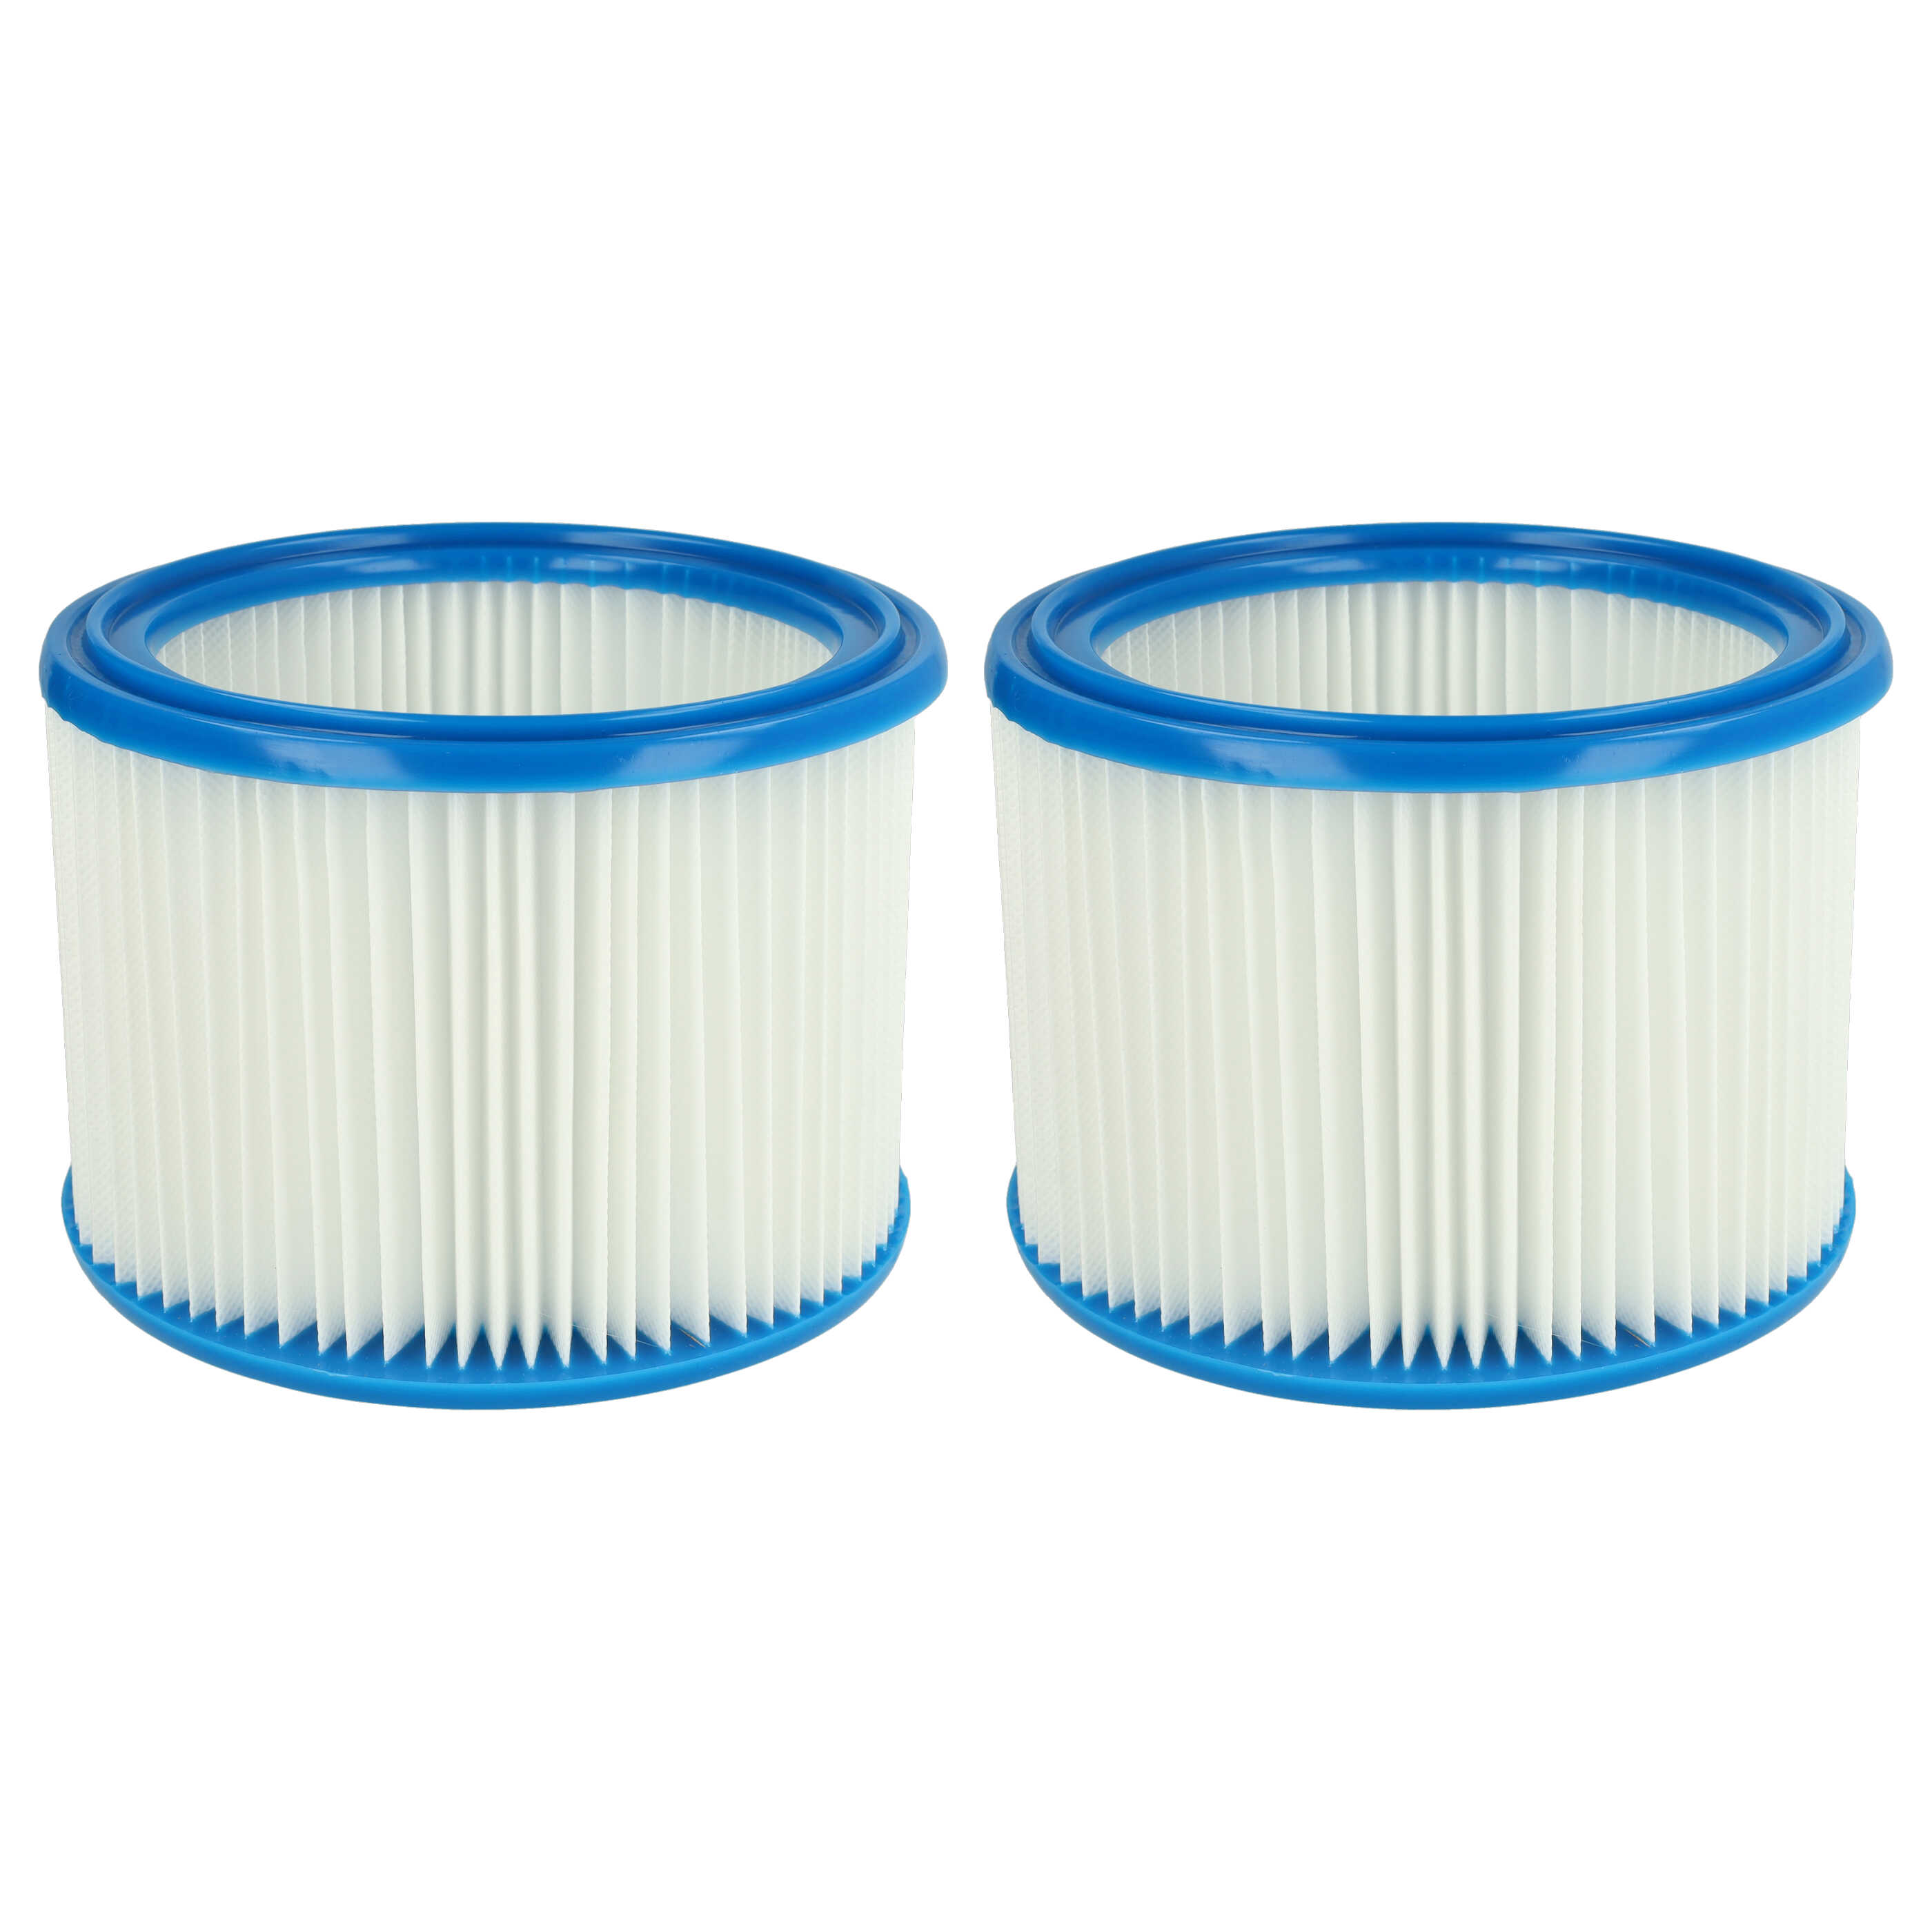 2x round filter replaces Bosch 2607432024 for BoschVacuum Cleaner, white / blue